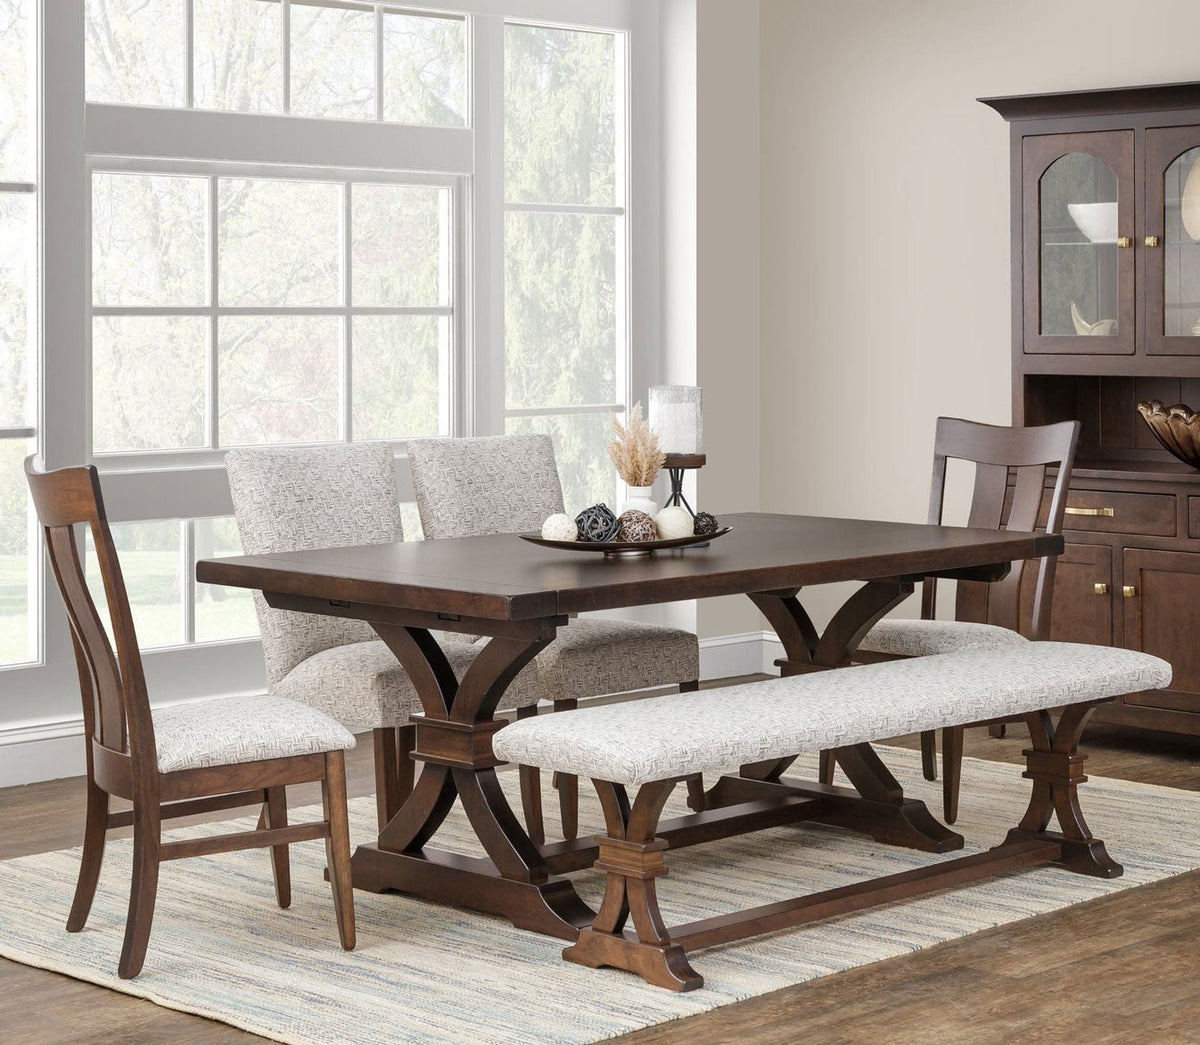 Sherwood Amish Table - snyders.furniture